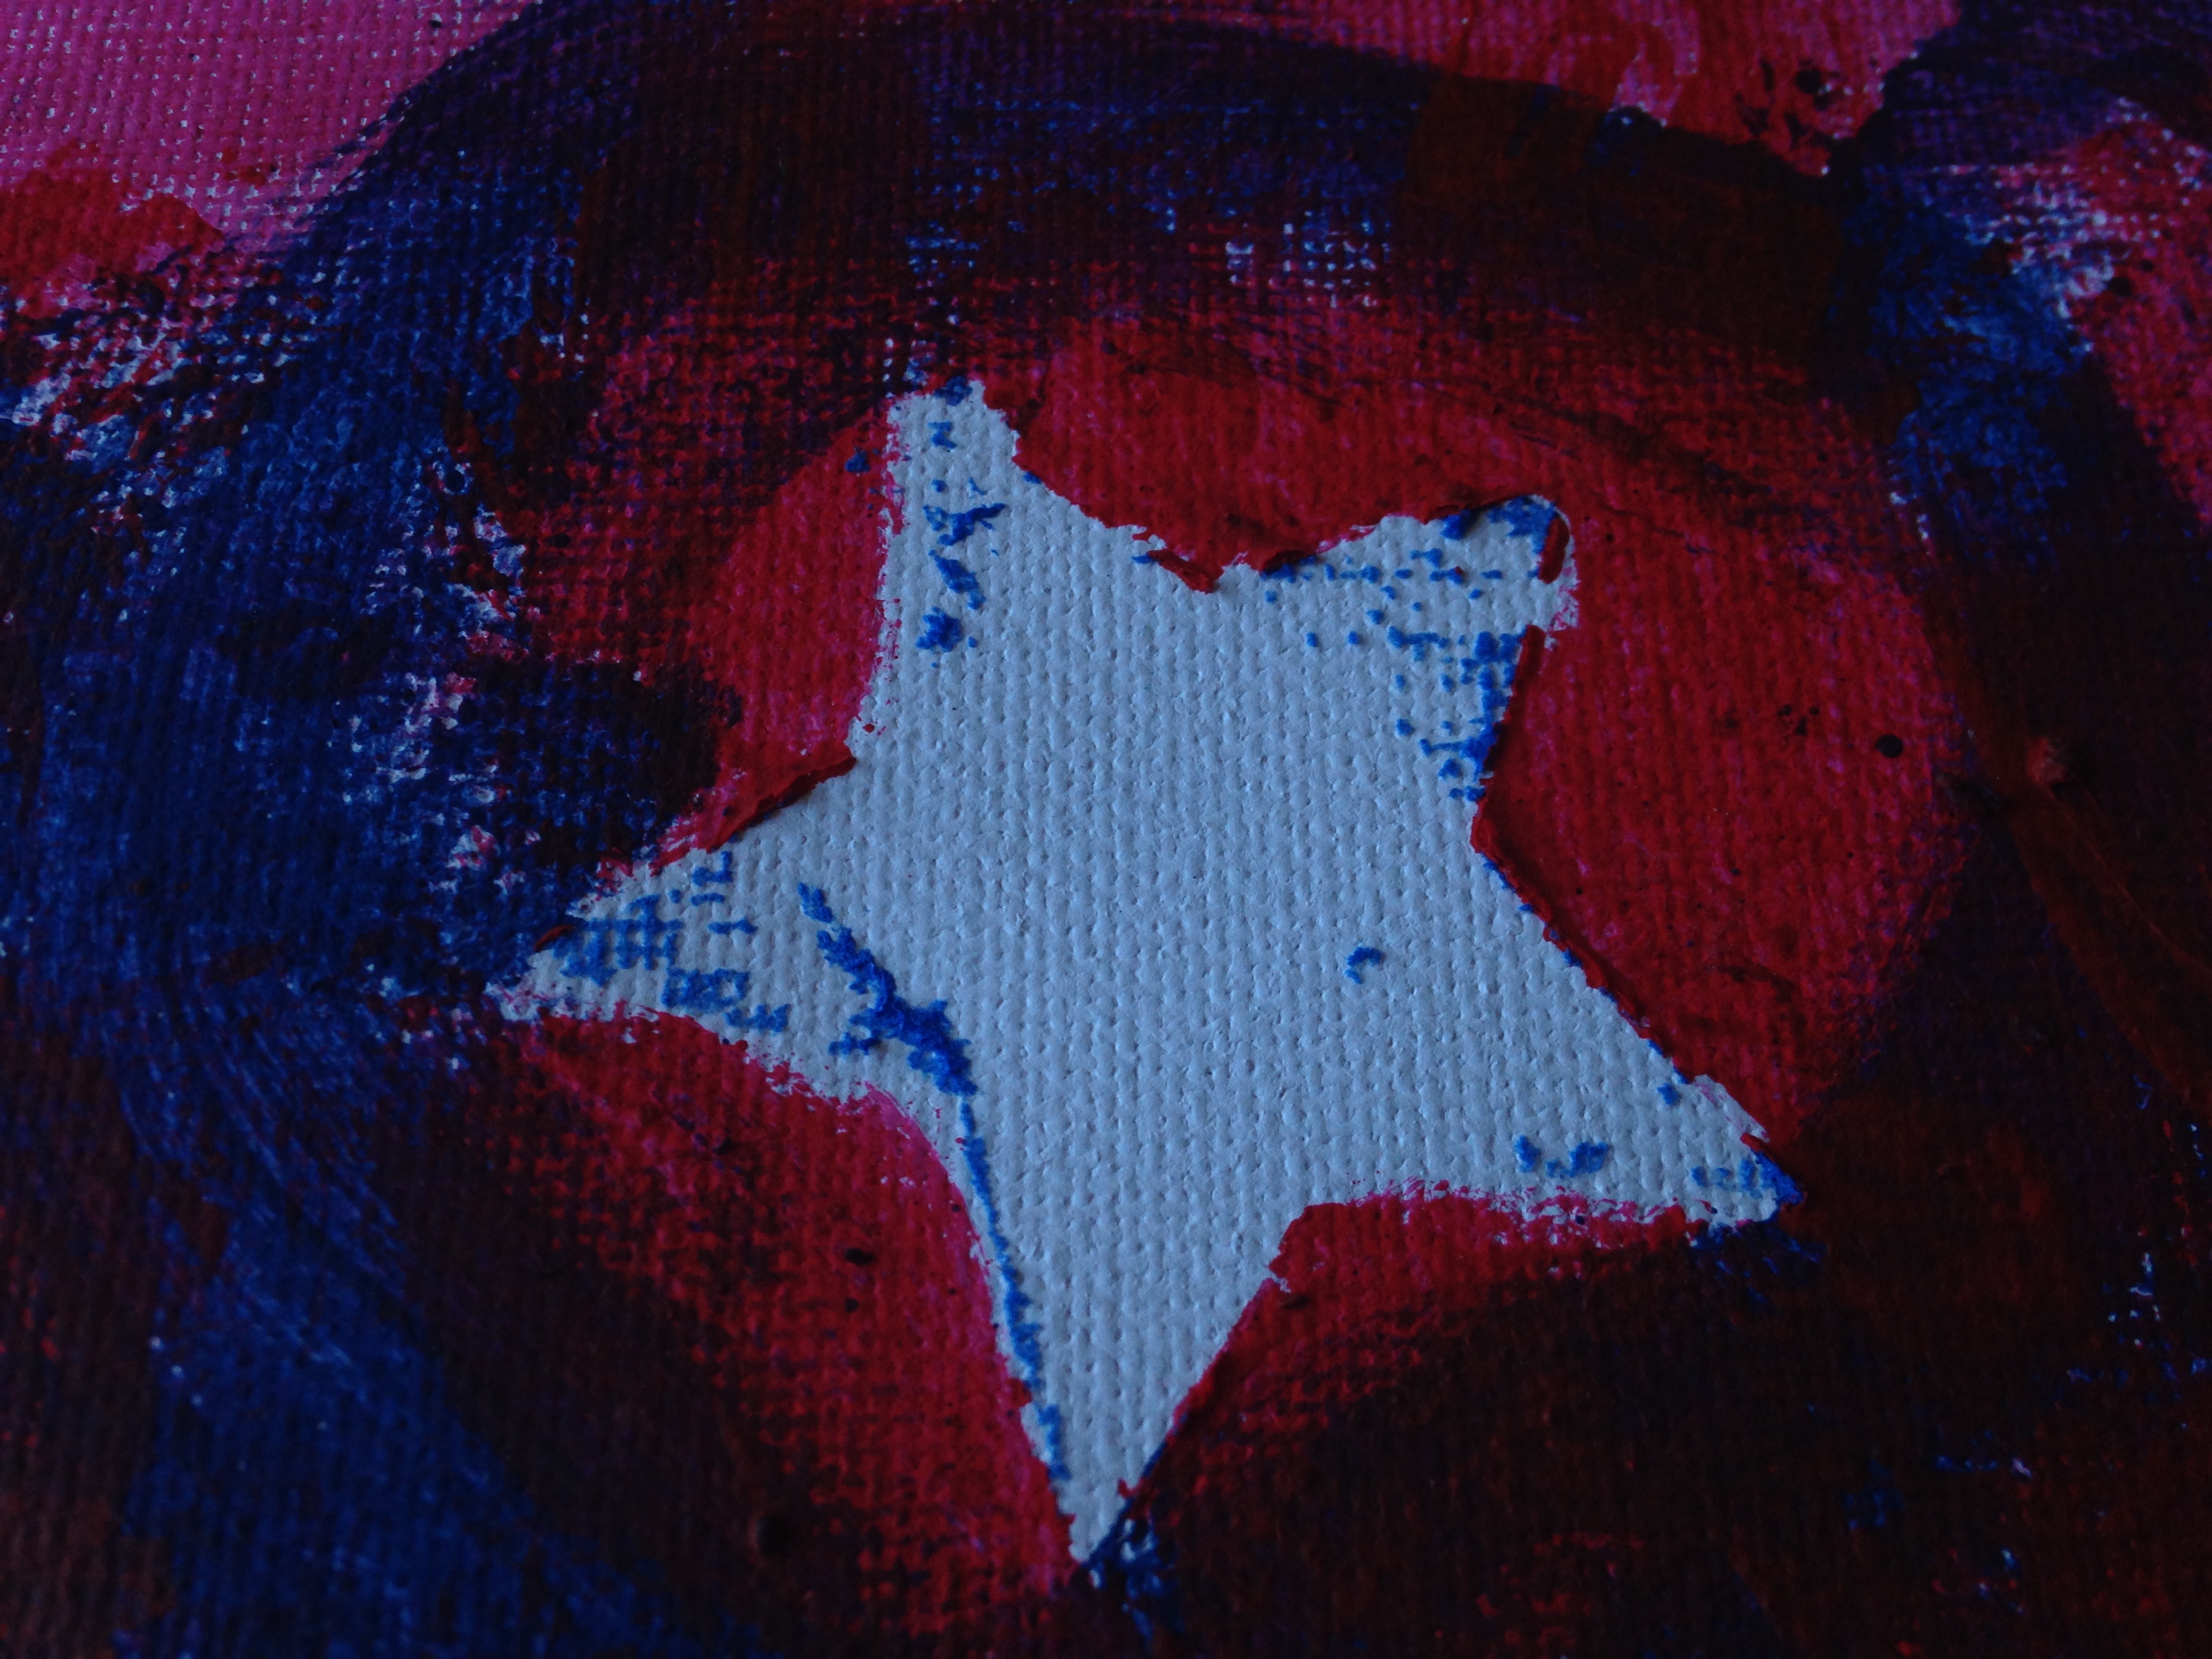 Easy Art with a Patriotic Flare